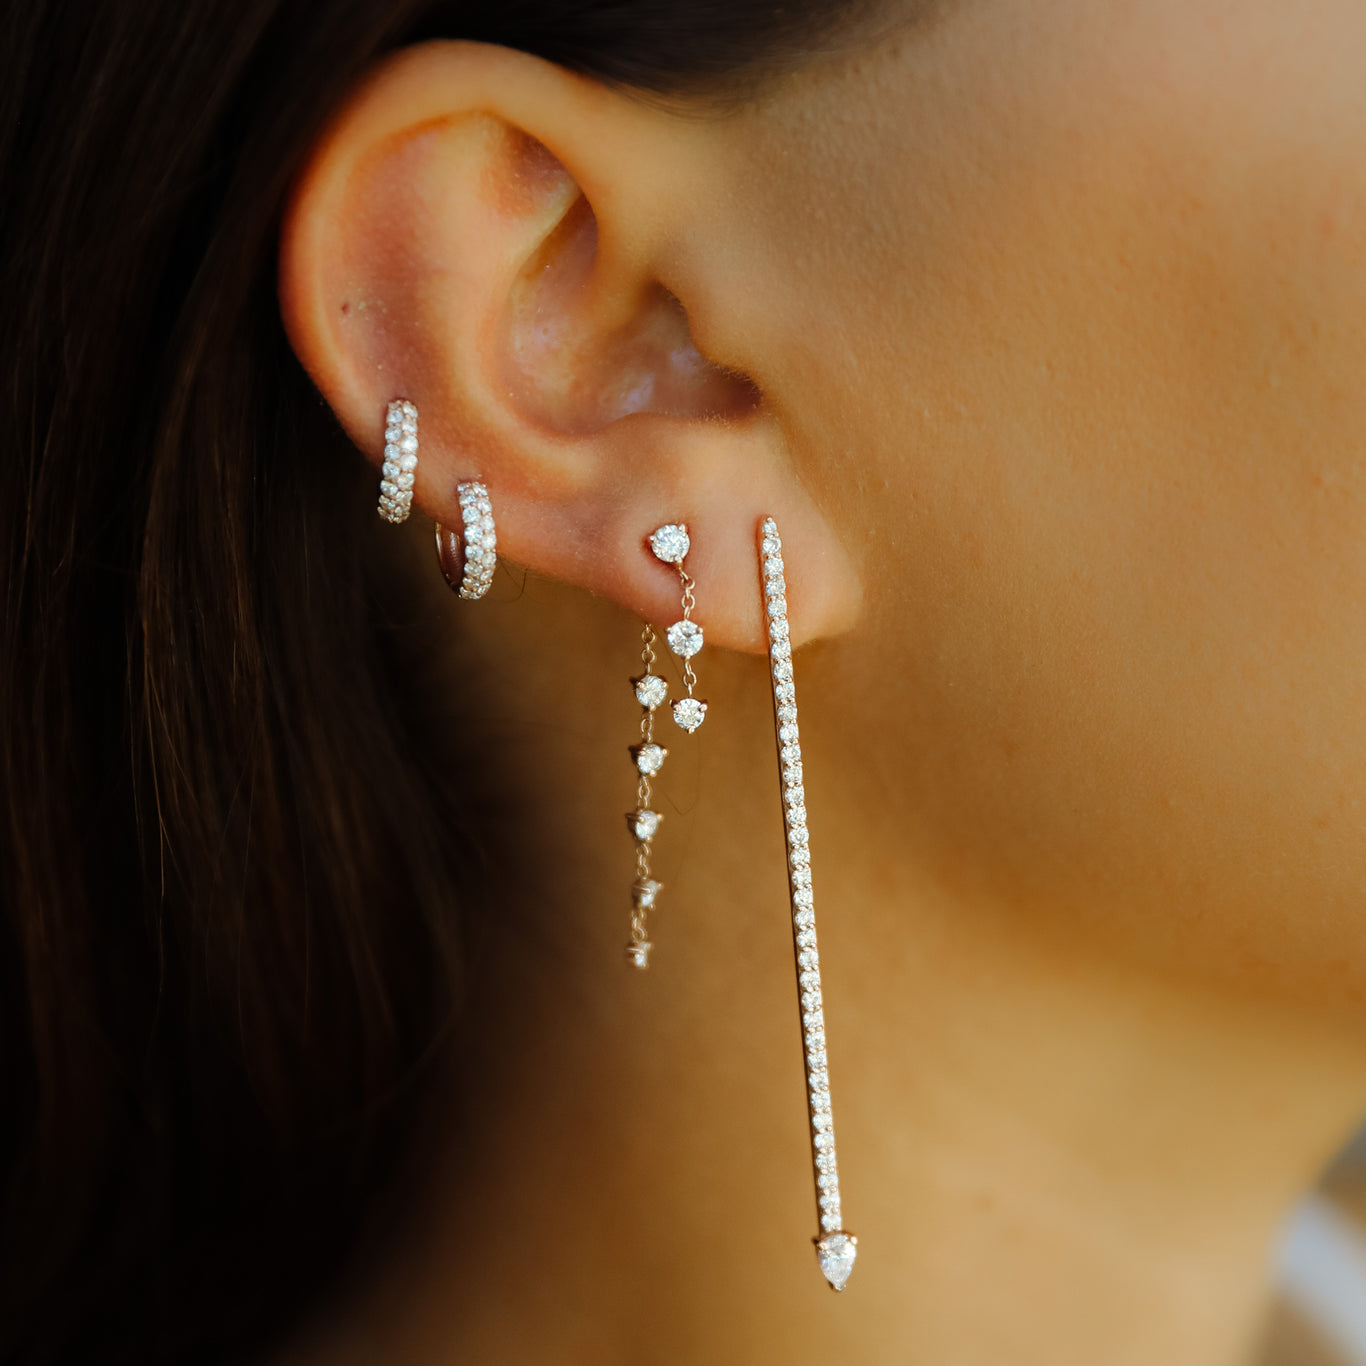 Starstruck Earrings shown with the Millo Earrings and Boom Huggies.